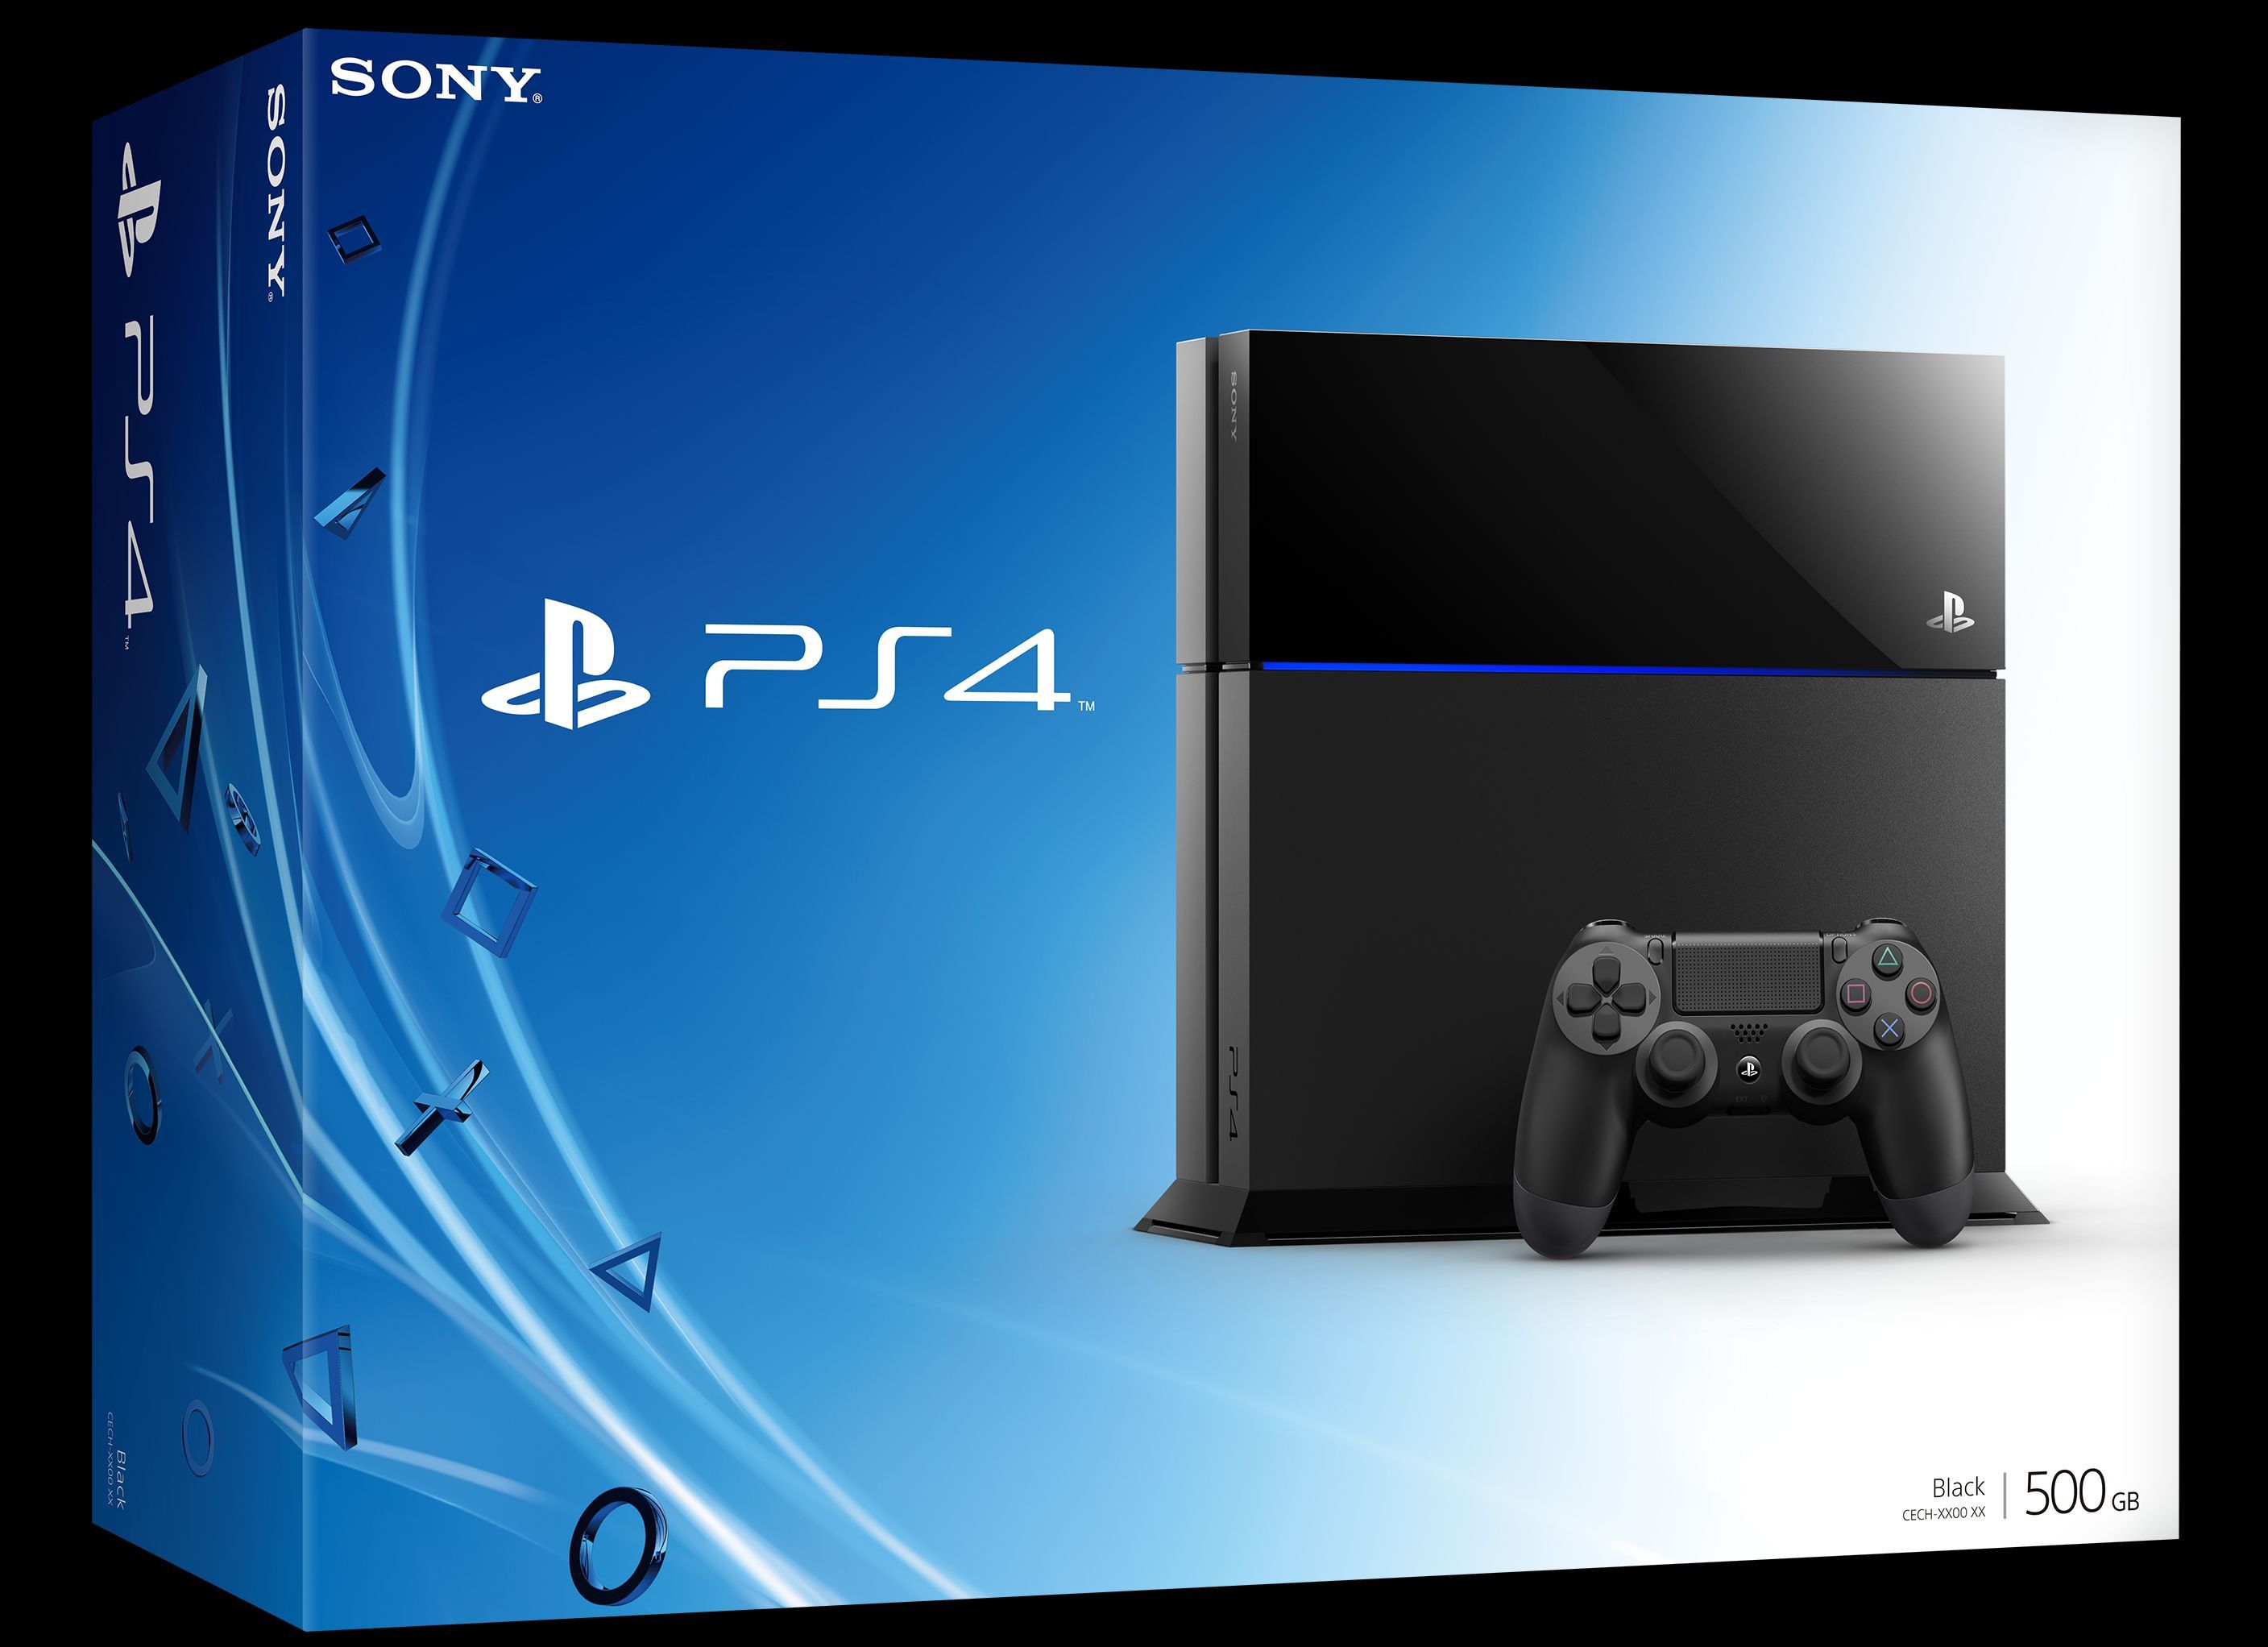 Gets a PS4 Early, Unboxes Video With Violent Enthusiasm